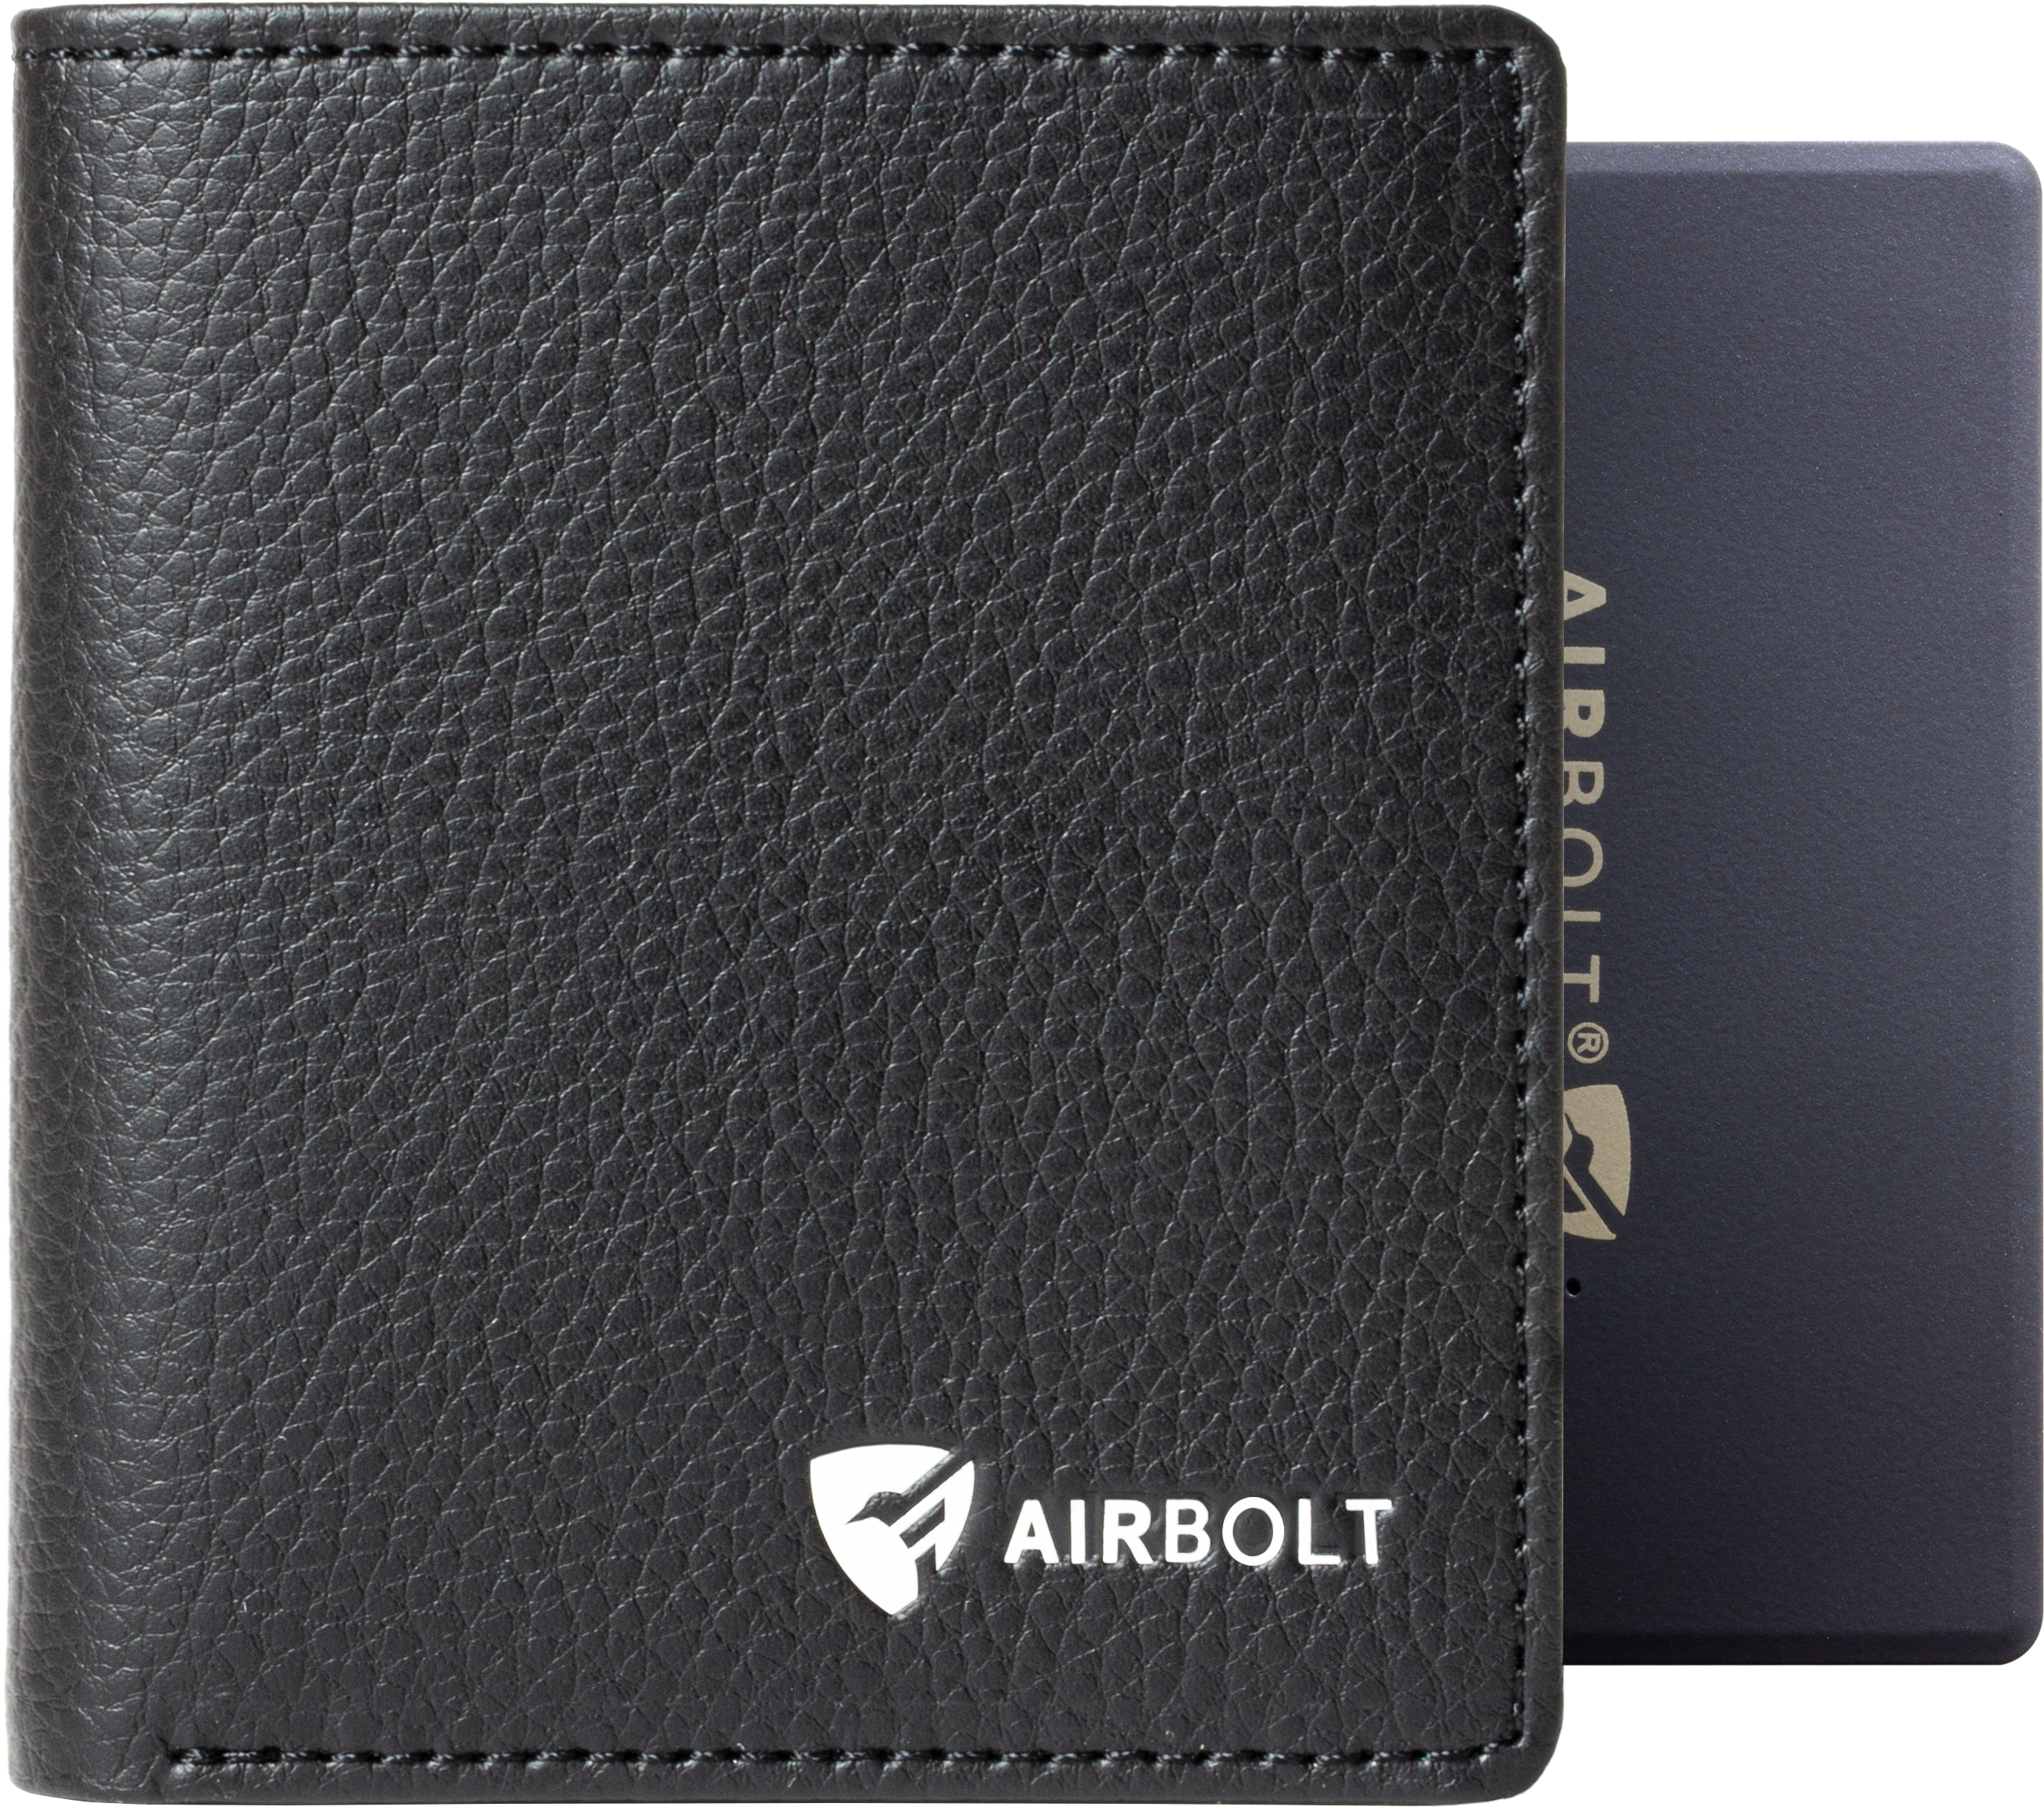 AirBolt Wallet with removable AirBolt Card